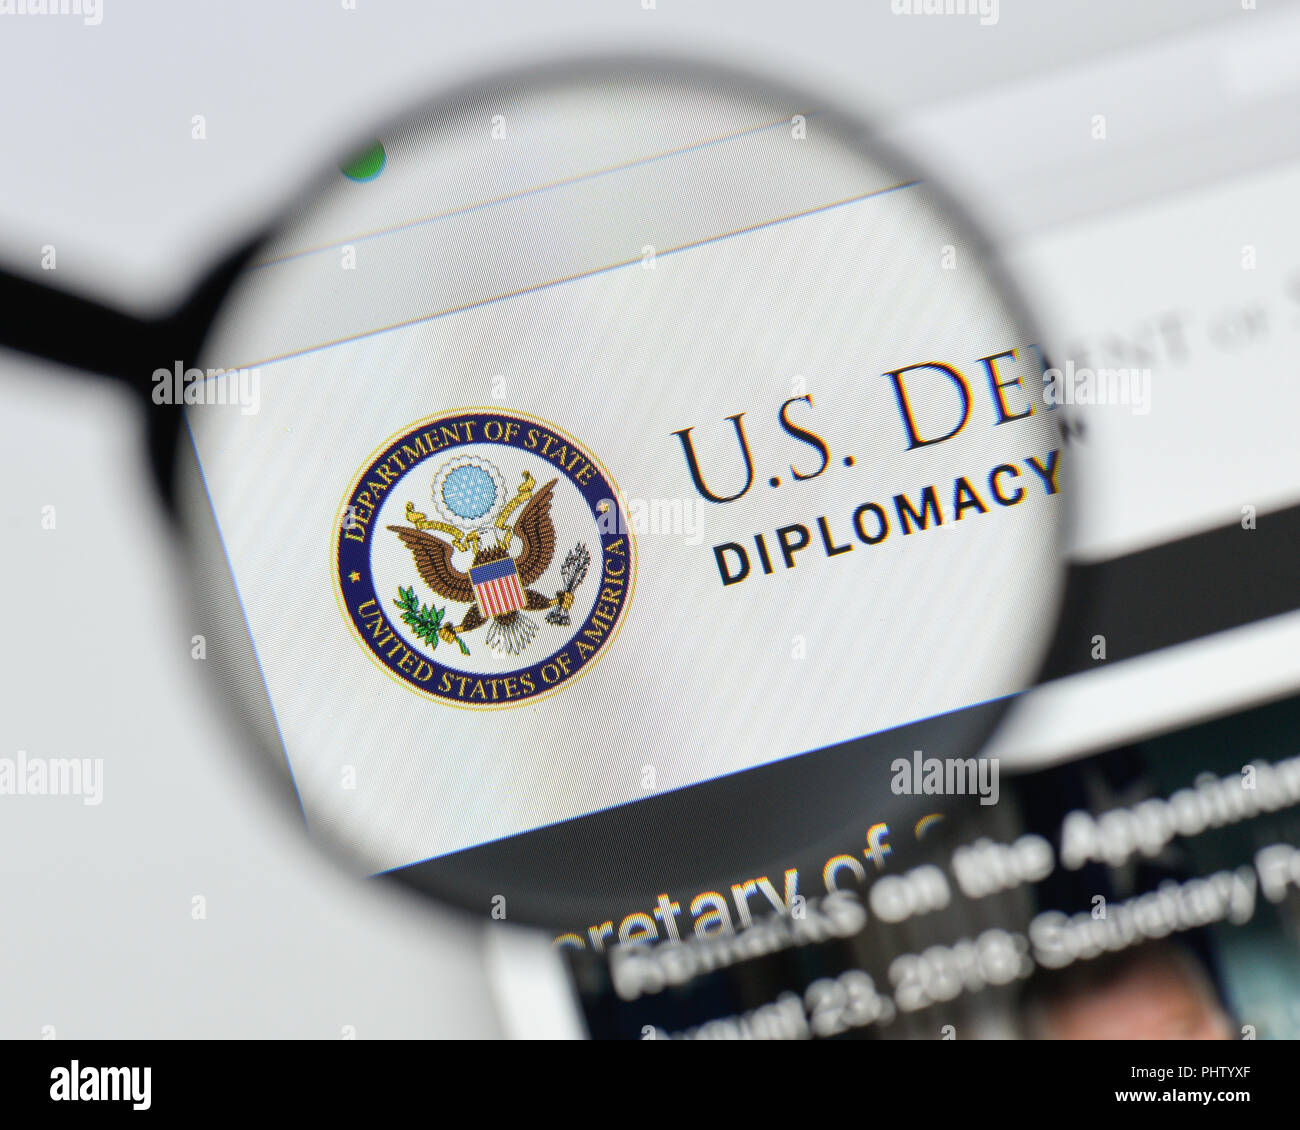 Milan, Italy - August 20, 2018: Department of State website homepage. Department of State logo visible. Stock Photo